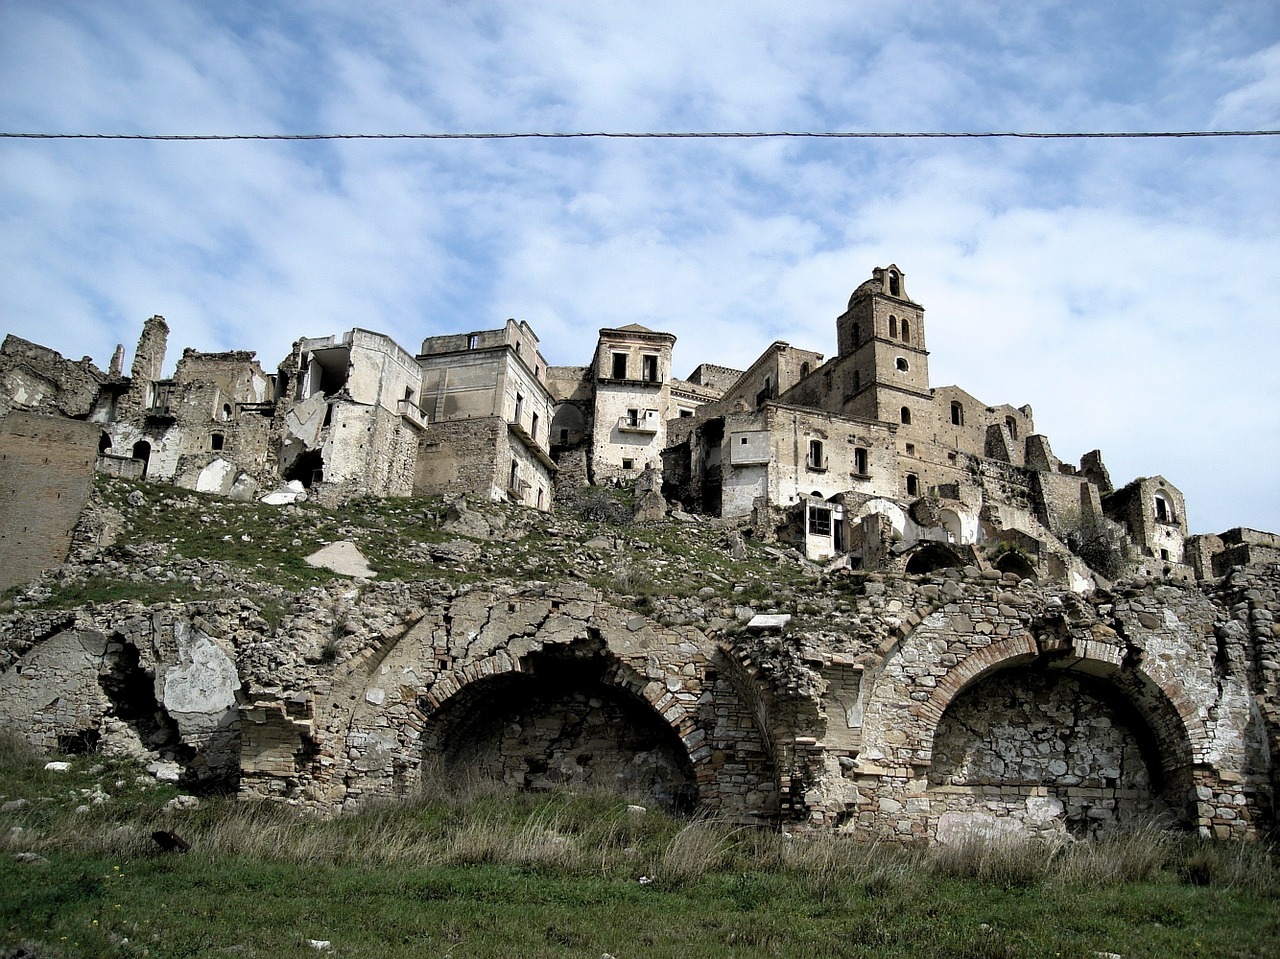 Craco is a ghost town and comune in the province of Matera, in the southern Italian region of Basilicata